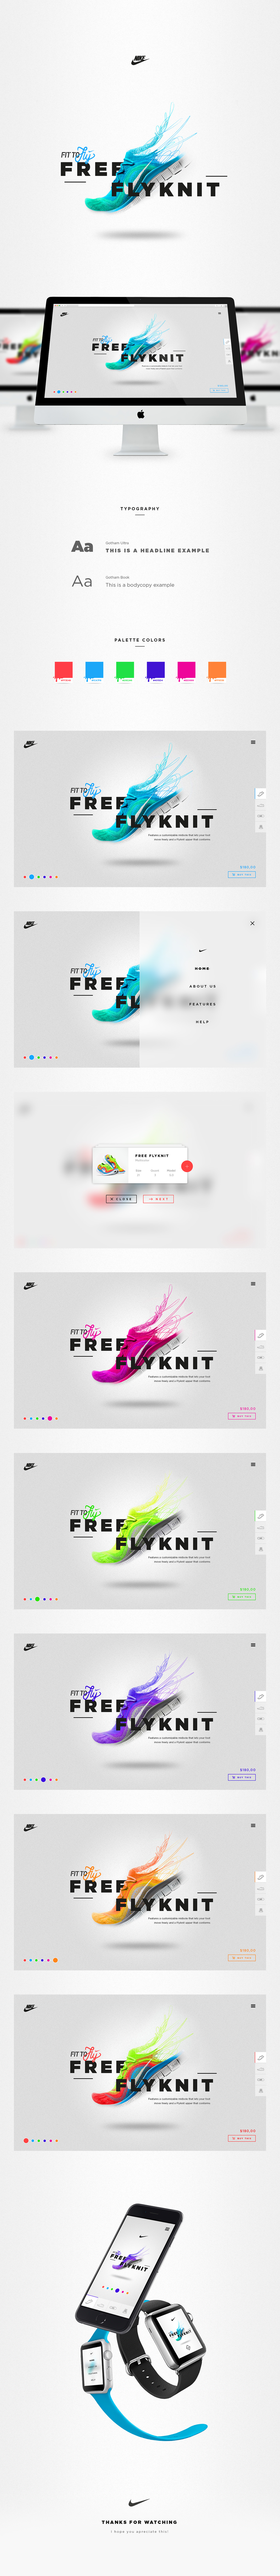 Nike concept interaction user experience user interface visual design landing page app Layout look minimal experimental ux free fryknit Web